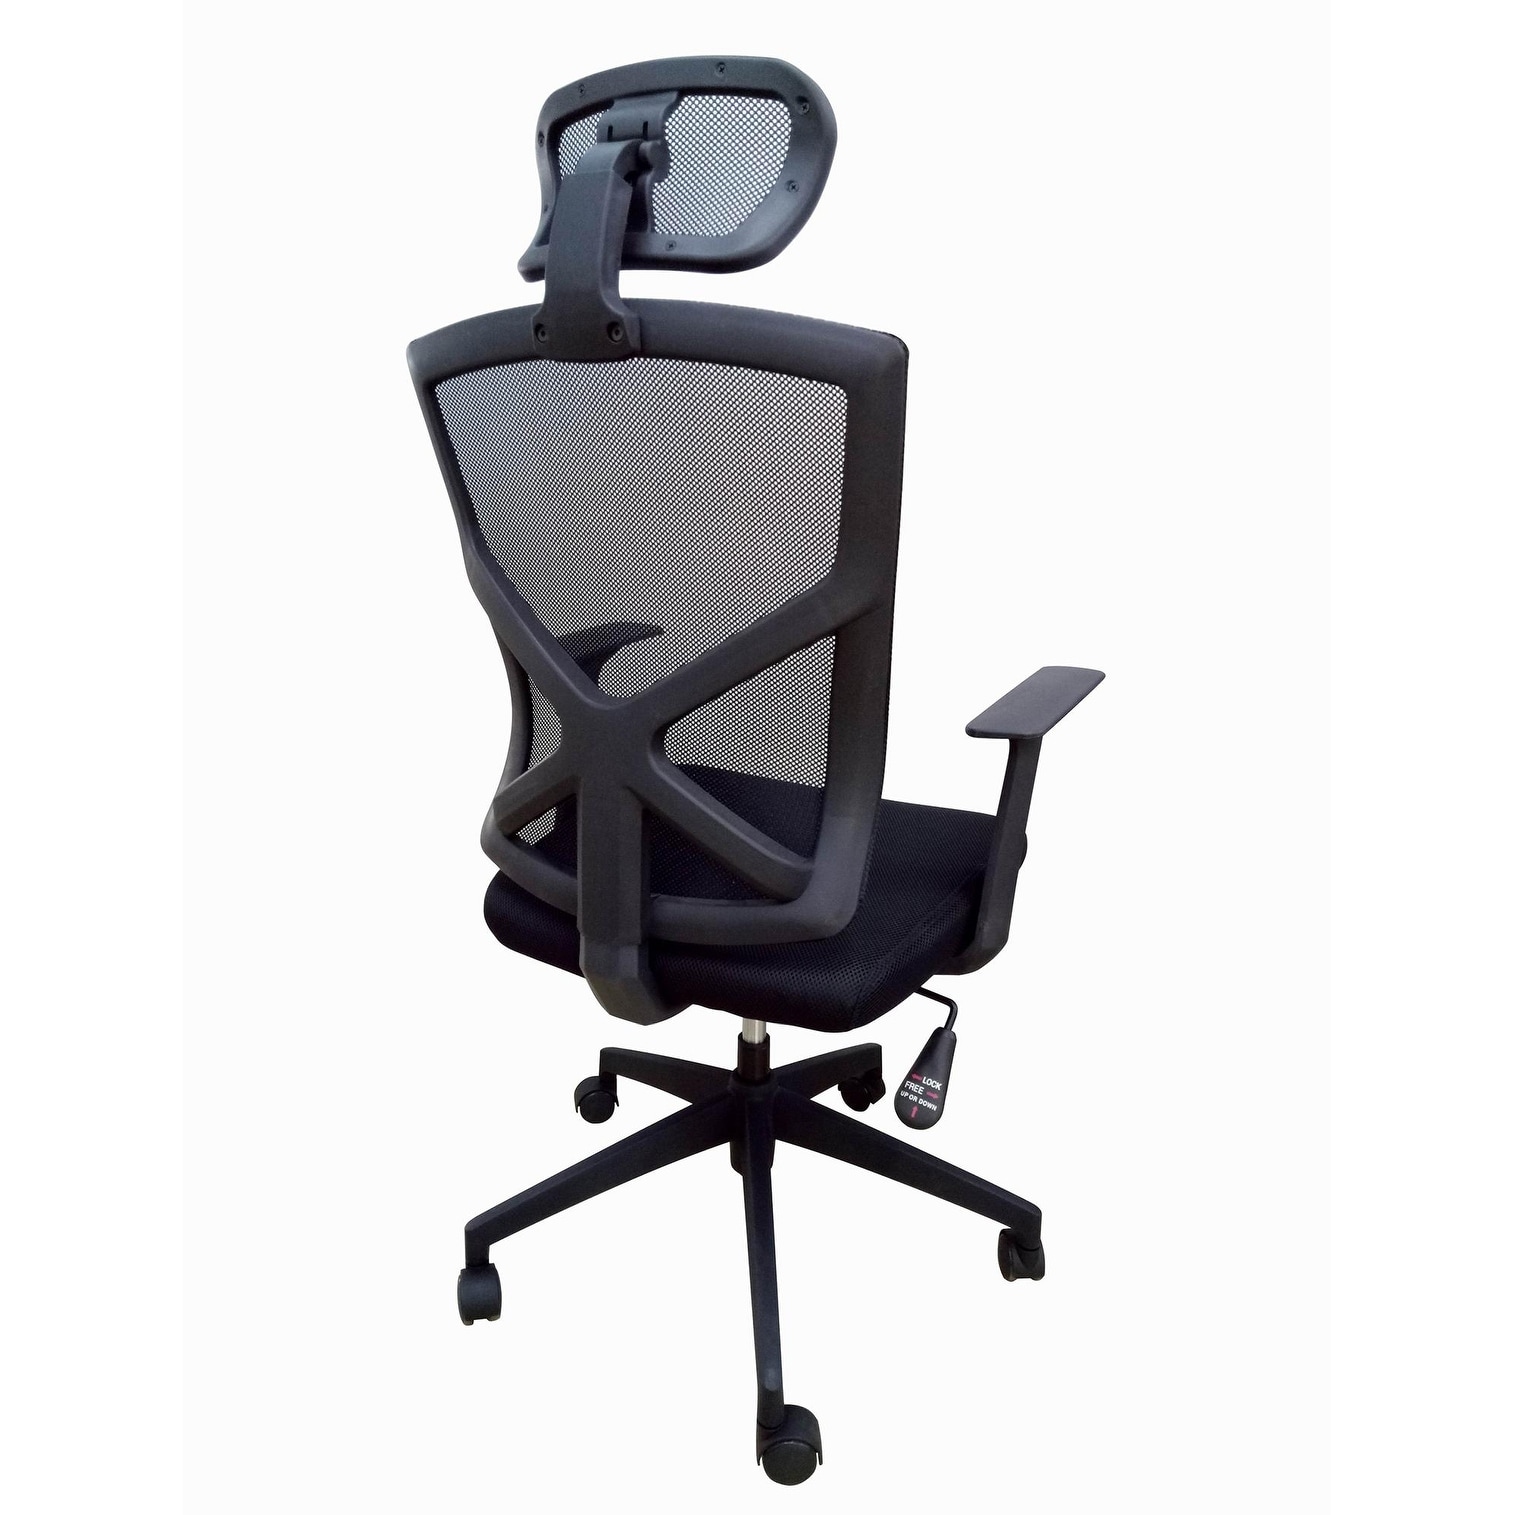 https://ak1.ostkcdn.com/images/products/is/images/direct/7429f51c48529fb00af5848b9cfbec93a9359ed4/2xhome-High-Back-With-Headrest-Chair-Office-Mesh-Chair-Tilt-Arms-Lumber-Support-Large-Base-Adjustable-Swivel-Task-Executive.jpg